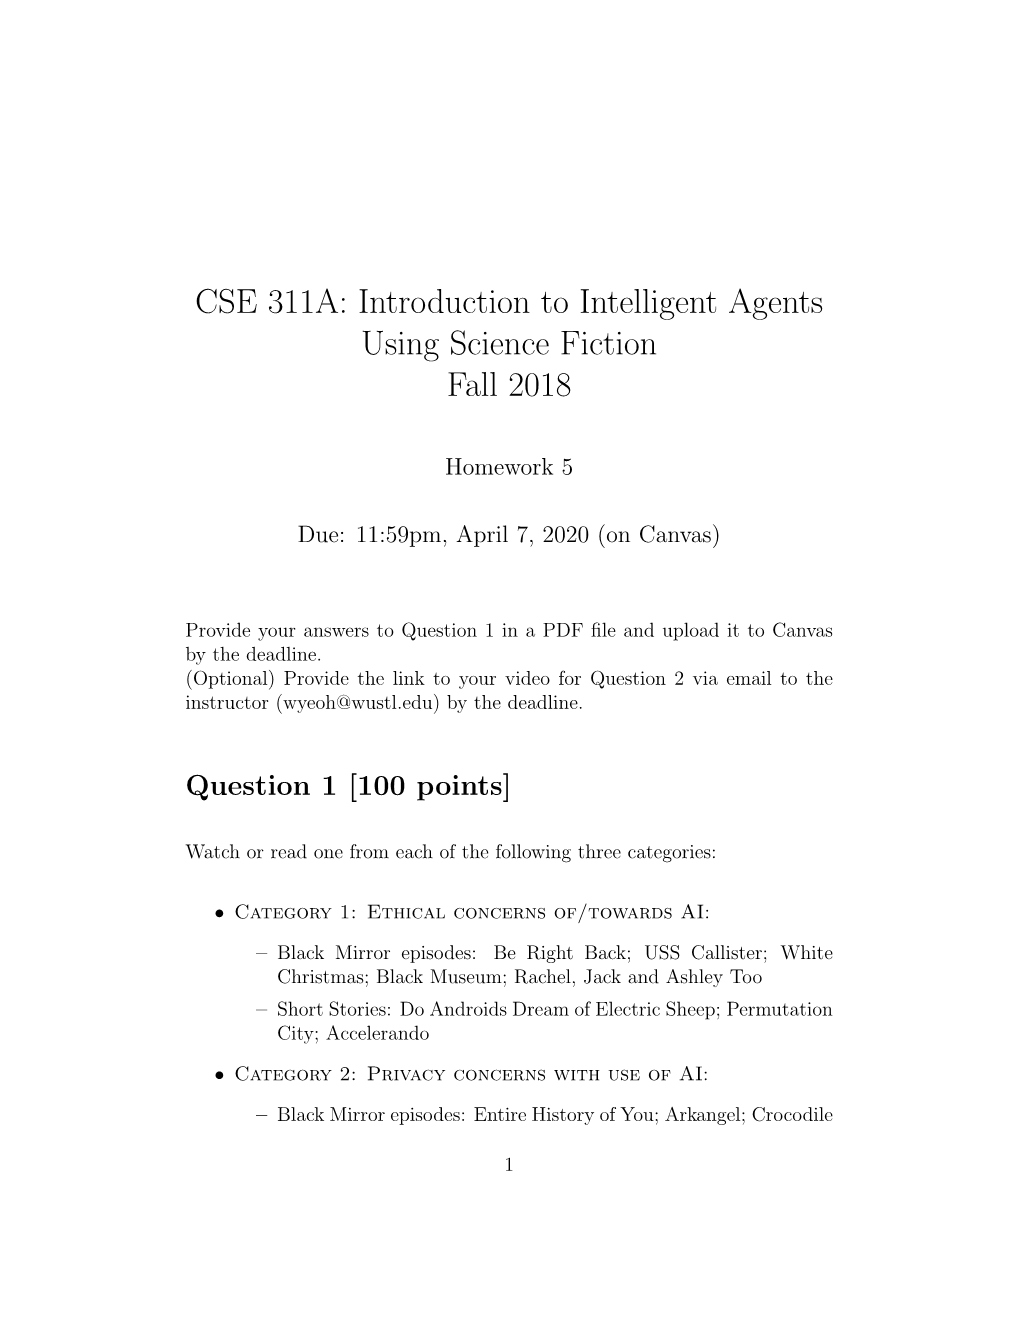 CSE 311A: Introduction to Intelligent Agents Using Science Fiction Fall 2018